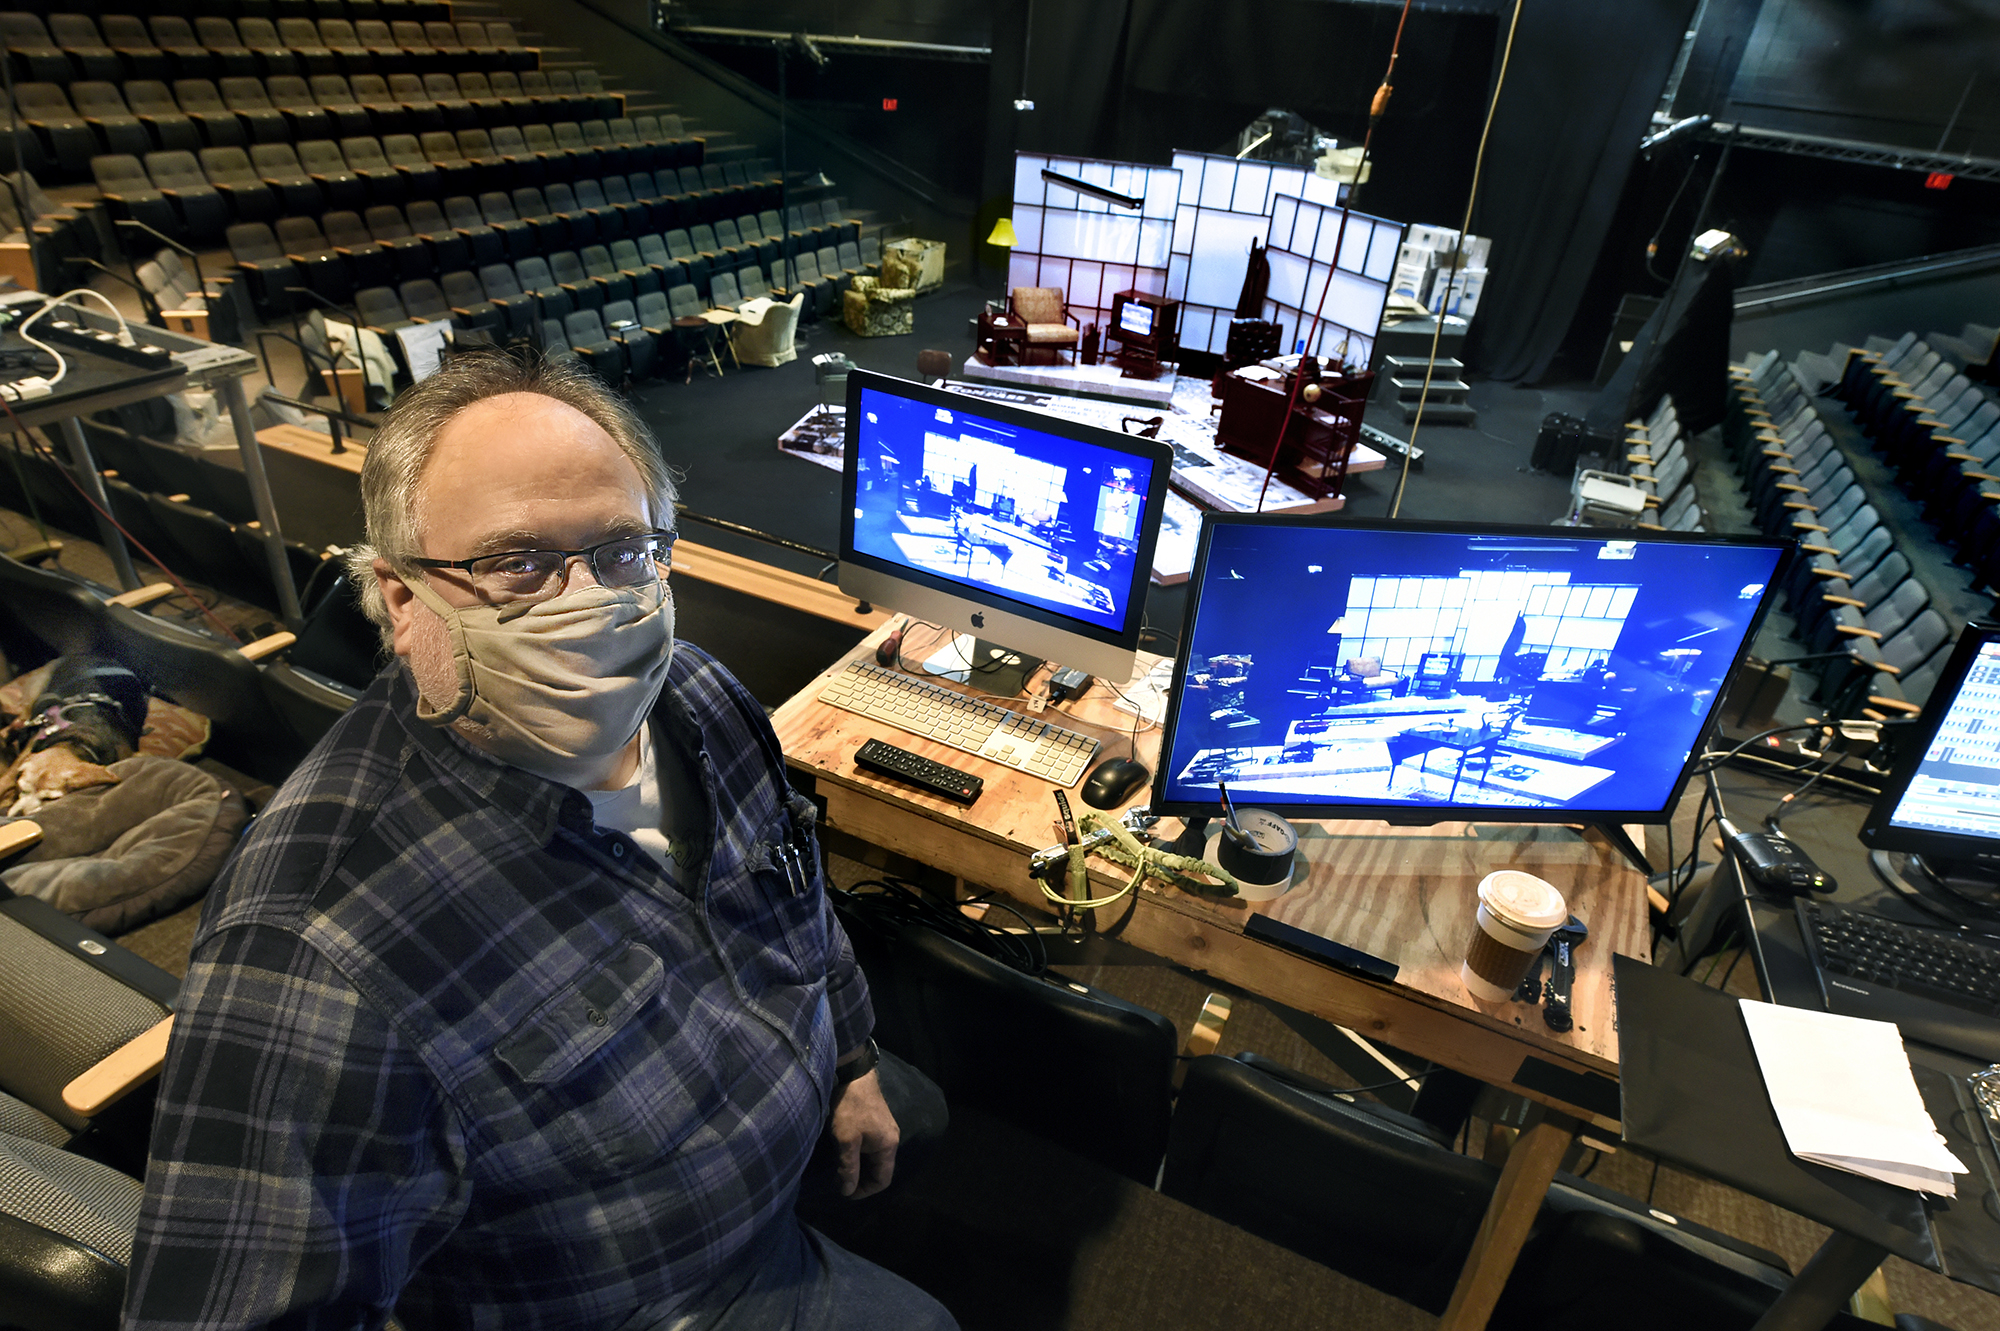 Michael Rolleri, wearing a mask, sits in the production booth of Paul Green Theatre up high in the theater.